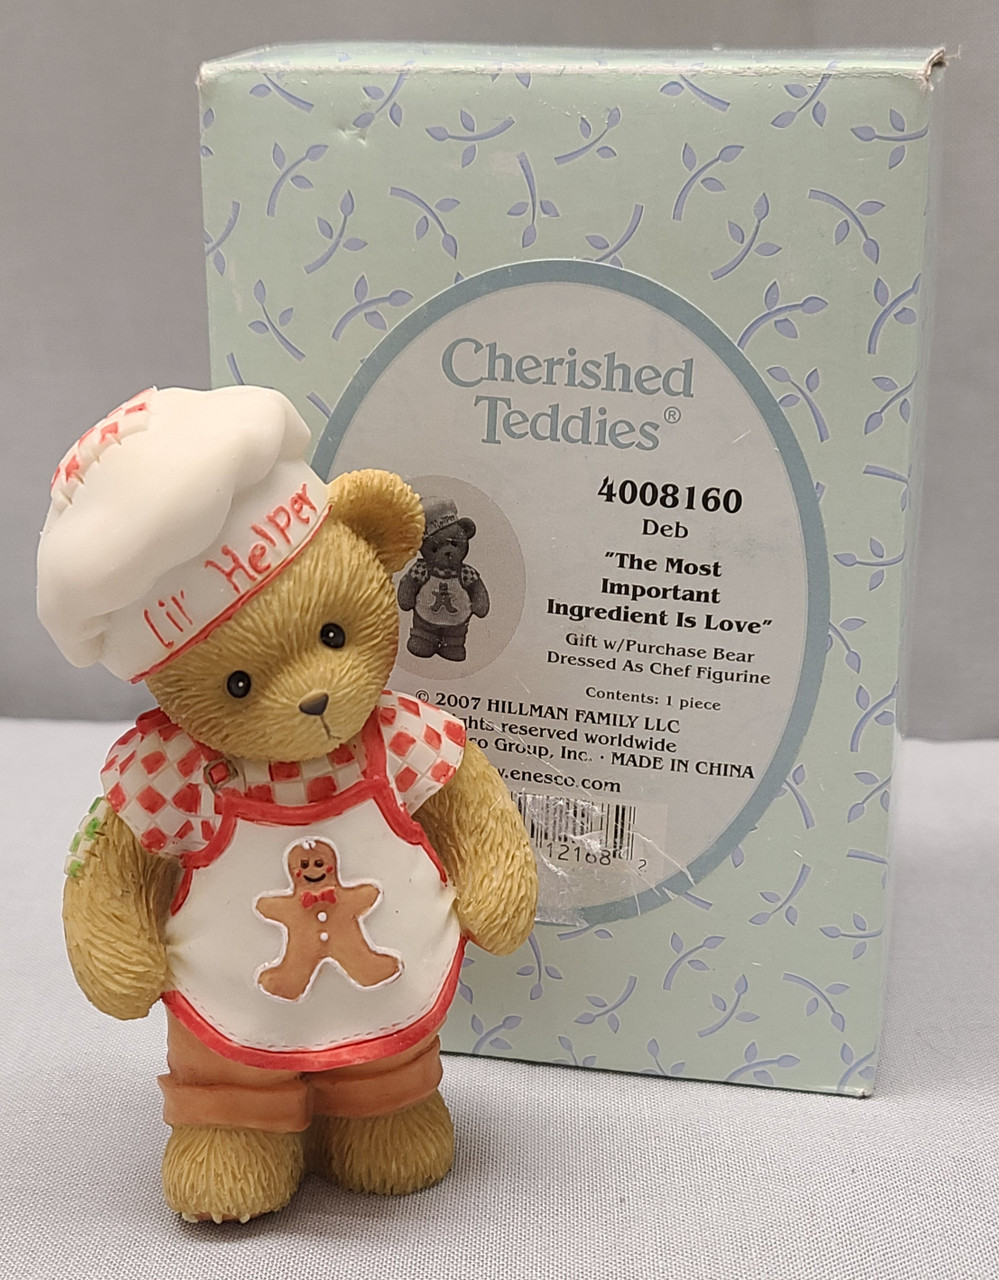 Cherished Teddies DEB "The Most Important Ingredient is Love" 4008160